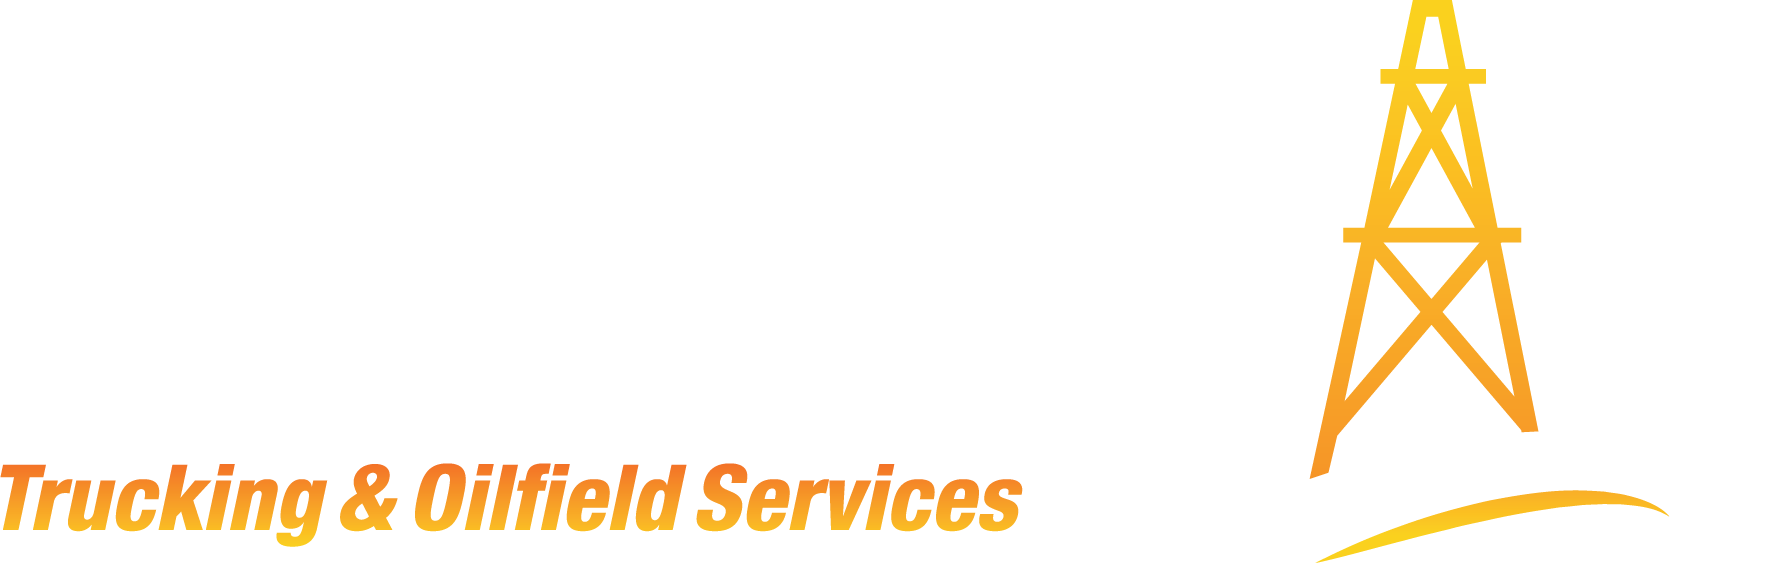 OVWR – Trucking & Oilfield Services